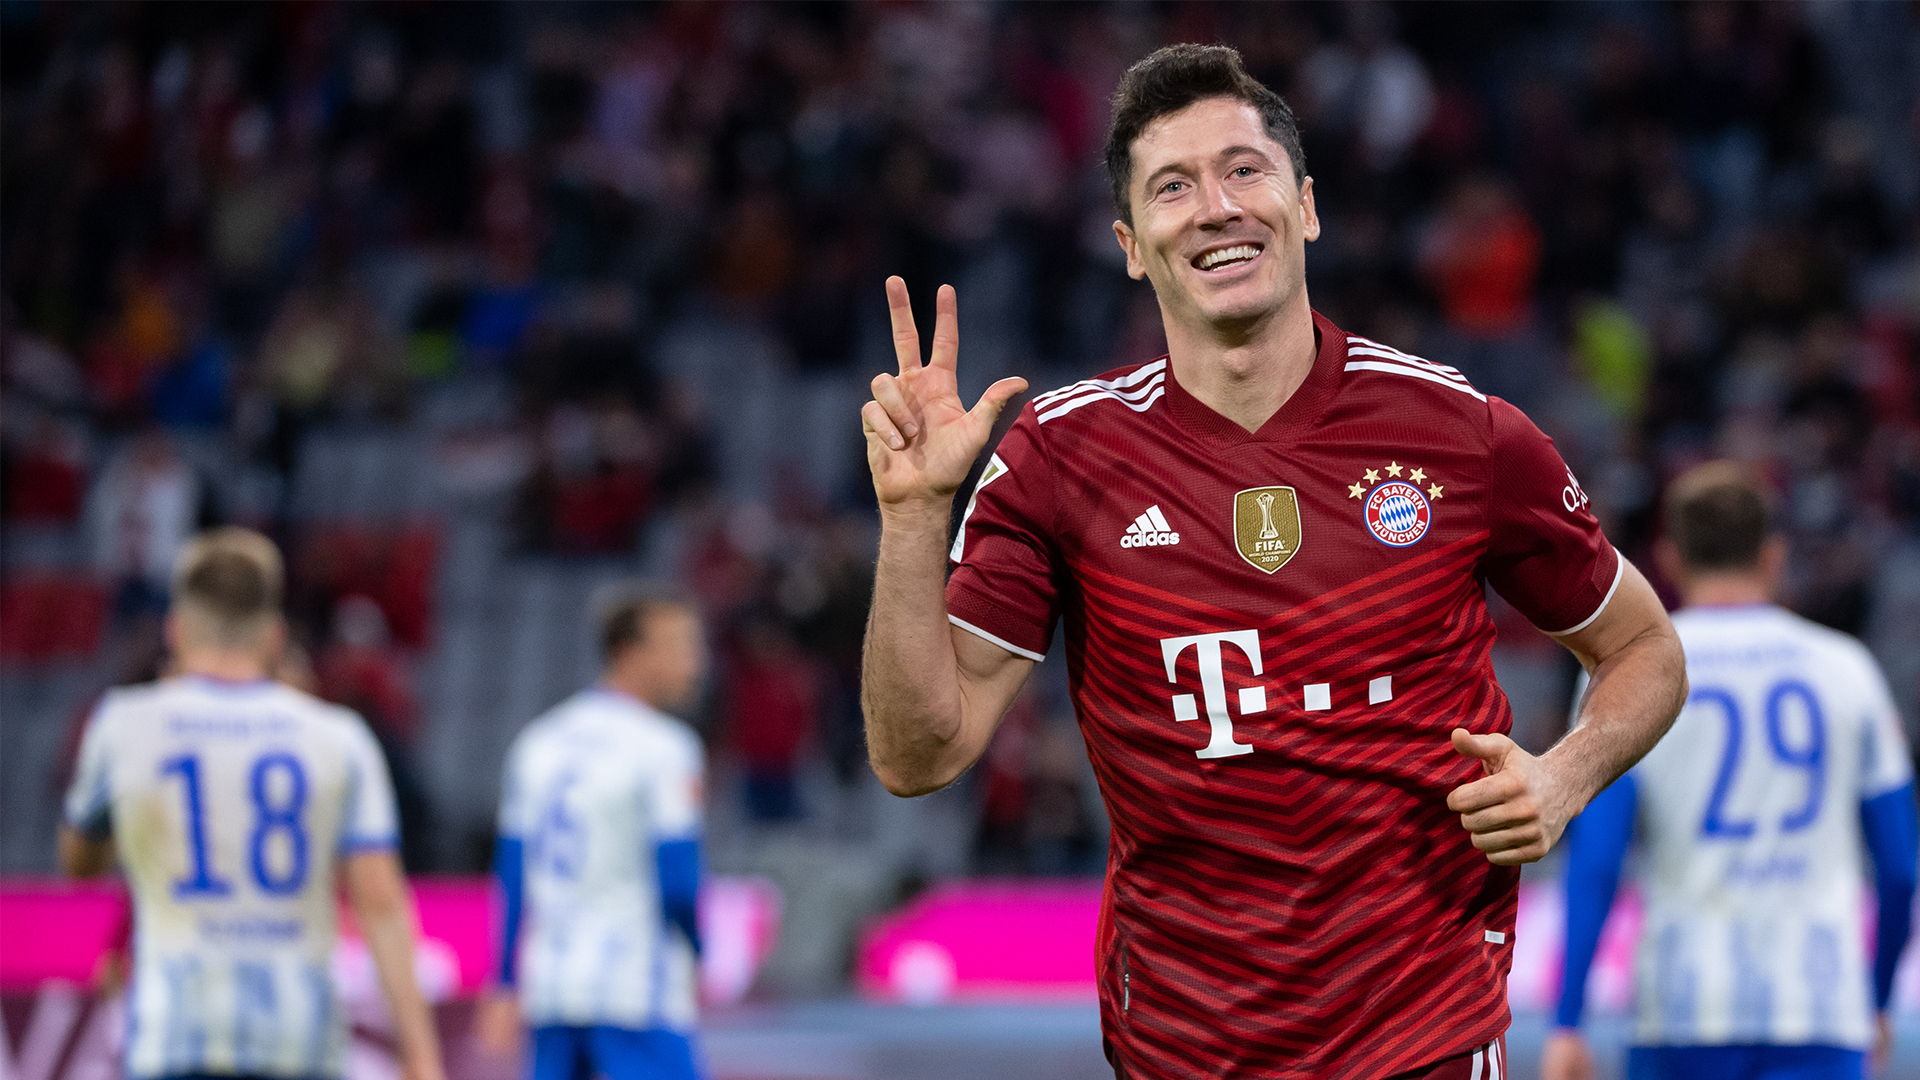 Barcelona consider the signing of Robert Lewandowski absolutely crucial to their sporting project